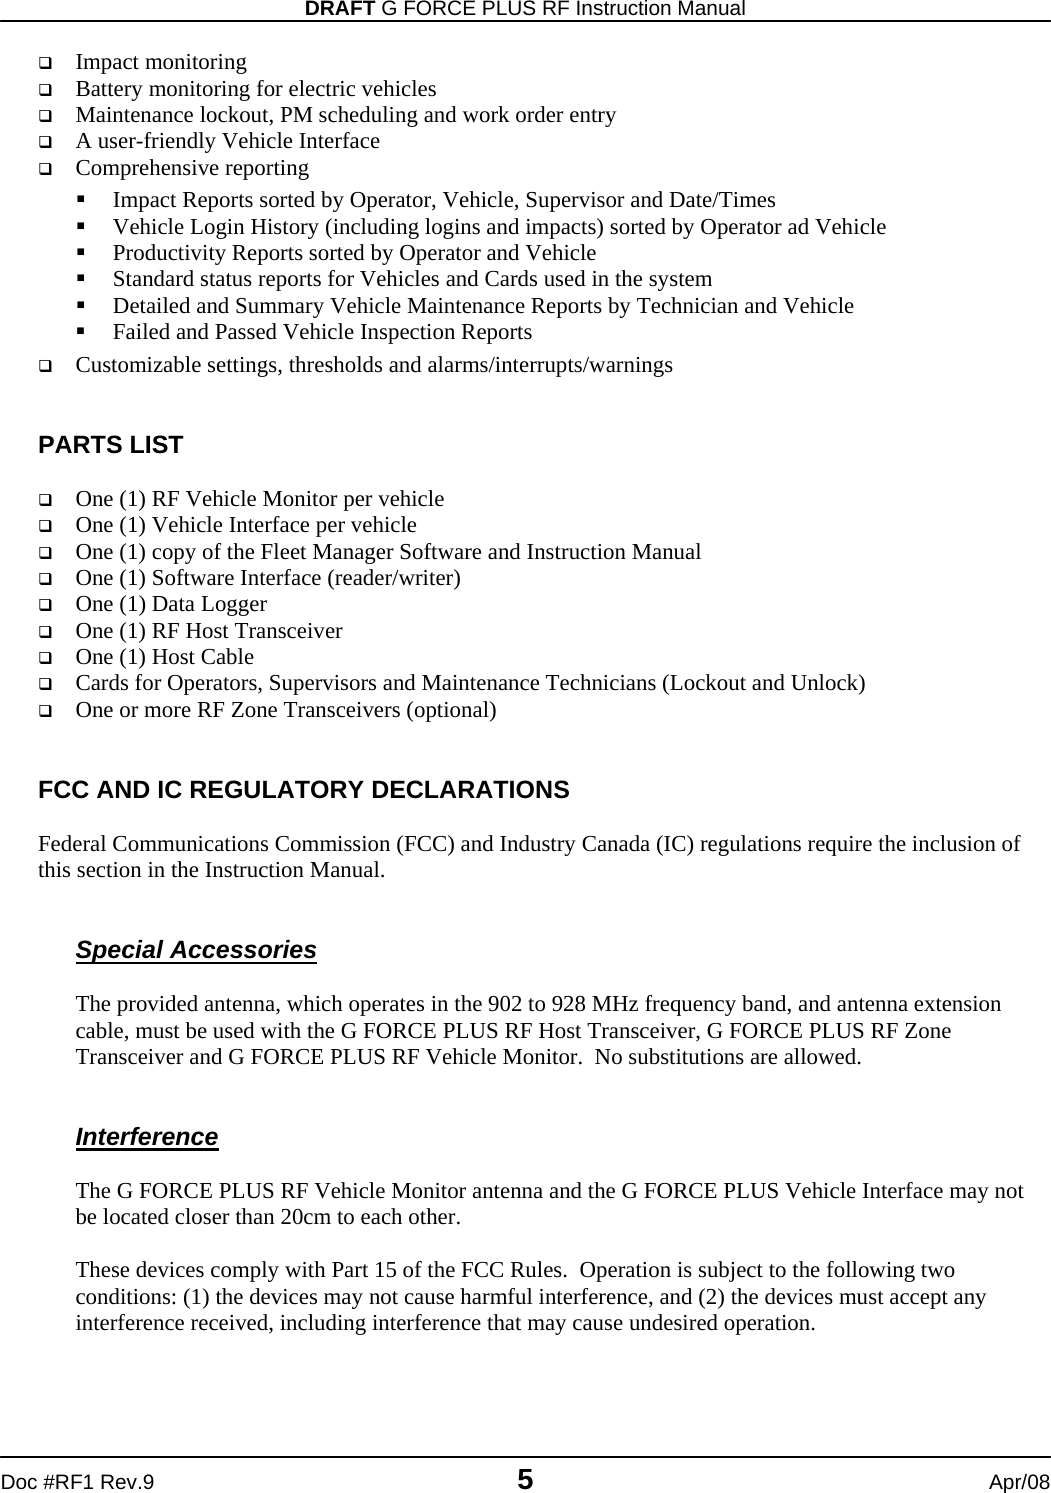 DRAFT G FORCE PLUS RF Instruction Manual   Doc #RF1 Rev.9  5  Apr/08  Impact monitoring  Battery monitoring for electric vehicles  Maintenance lockout, PM scheduling and work order entry  A user-friendly Vehicle Interface  Comprehensive reporting  Impact Reports sorted by Operator, Vehicle, Supervisor and Date/Times  Vehicle Login History (including logins and impacts) sorted by Operator ad Vehicle  Productivity Reports sorted by Operator and Vehicle  Standard status reports for Vehicles and Cards used in the system  Detailed and Summary Vehicle Maintenance Reports by Technician and Vehicle  Failed and Passed Vehicle Inspection Reports  Customizable settings, thresholds and alarms/interrupts/warnings   PARTS LIST   One (1) RF Vehicle Monitor per vehicle  One (1) Vehicle Interface per vehicle  One (1) copy of the Fleet Manager Software and Instruction Manual  One (1) Software Interface (reader/writer)  One (1) Data Logger  One (1) RF Host Transceiver  One (1) Host Cable  Cards for Operators, Supervisors and Maintenance Technicians (Lockout and Unlock)  One or more RF Zone Transceivers (optional)   FCC AND IC REGULATORY DECLARATIONS  Federal Communications Commission (FCC) and Industry Canada (IC) regulations require the inclusion of this section in the Instruction Manual.   Special Accessories  The provided antenna, which operates in the 902 to 928 MHz frequency band, and antenna extension cable, must be used with the G FORCE PLUS RF Host Transceiver, G FORCE PLUS RF Zone Transceiver and G FORCE PLUS RF Vehicle Monitor.  No substitutions are allowed.     Interference  The G FORCE PLUS RF Vehicle Monitor antenna and the G FORCE PLUS Vehicle Interface may not be located closer than 20cm to each other.  These devices comply with Part 15 of the FCC Rules.  Operation is subject to the following two conditions: (1) the devices may not cause harmful interference, and (2) the devices must accept any interference received, including interference that may cause undesired operation.   